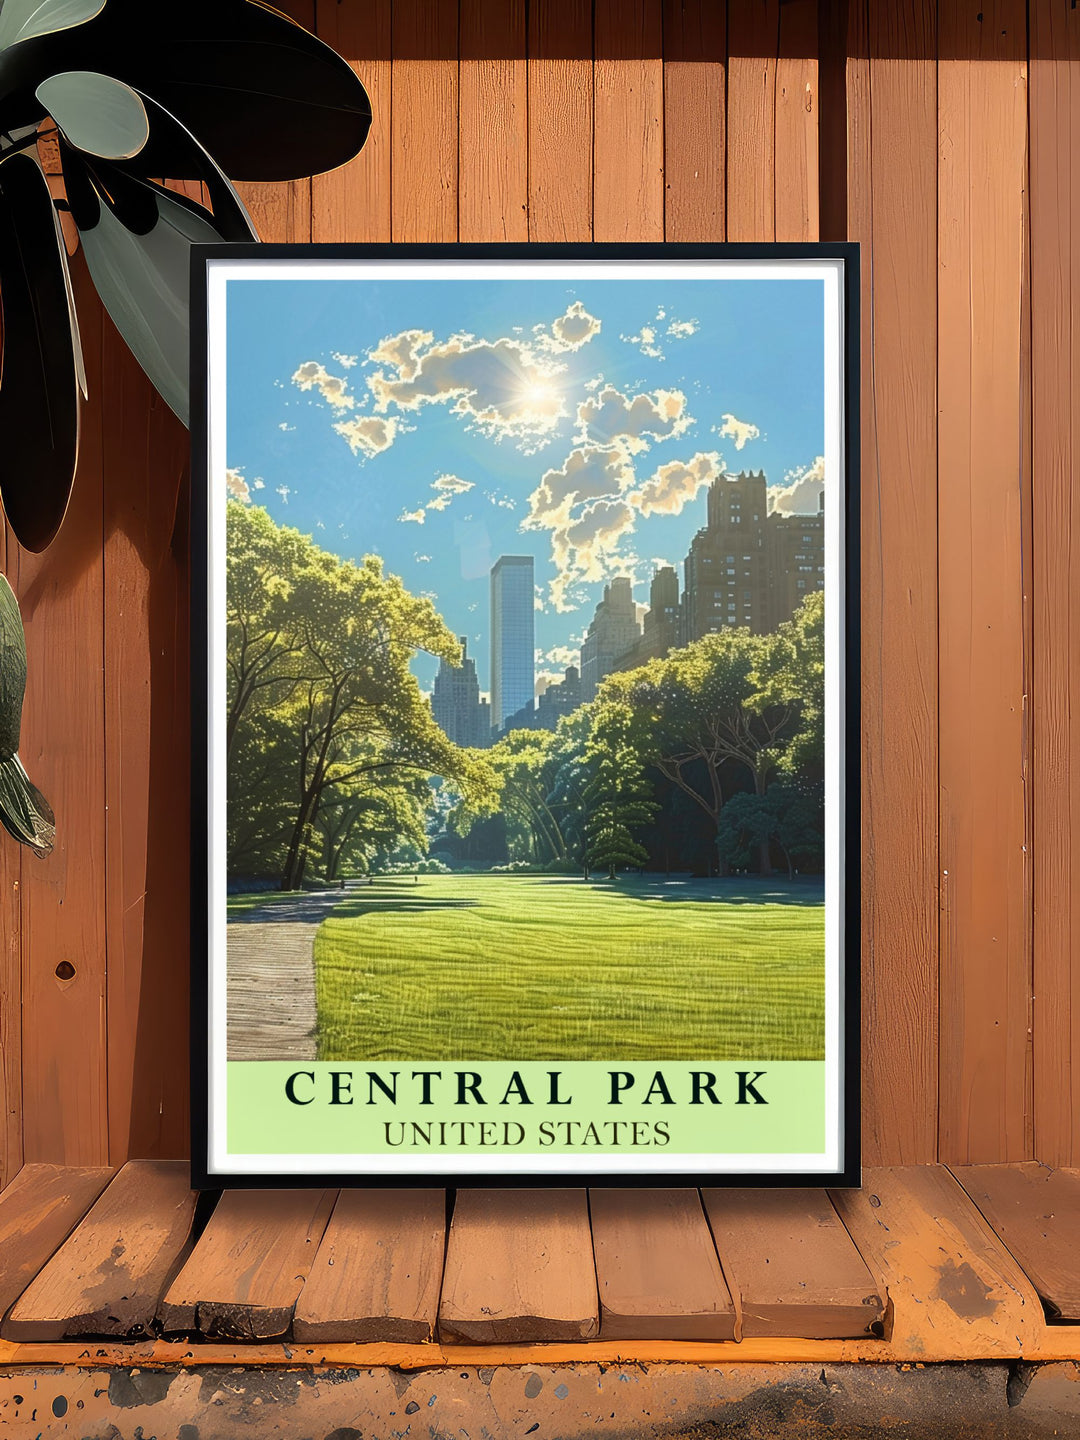 The picturesque scenery of Central Parks Lawn and the historic allure of New York are featured in this vibrant travel poster, perfect for adding the citys unique charm and heritage to your home.